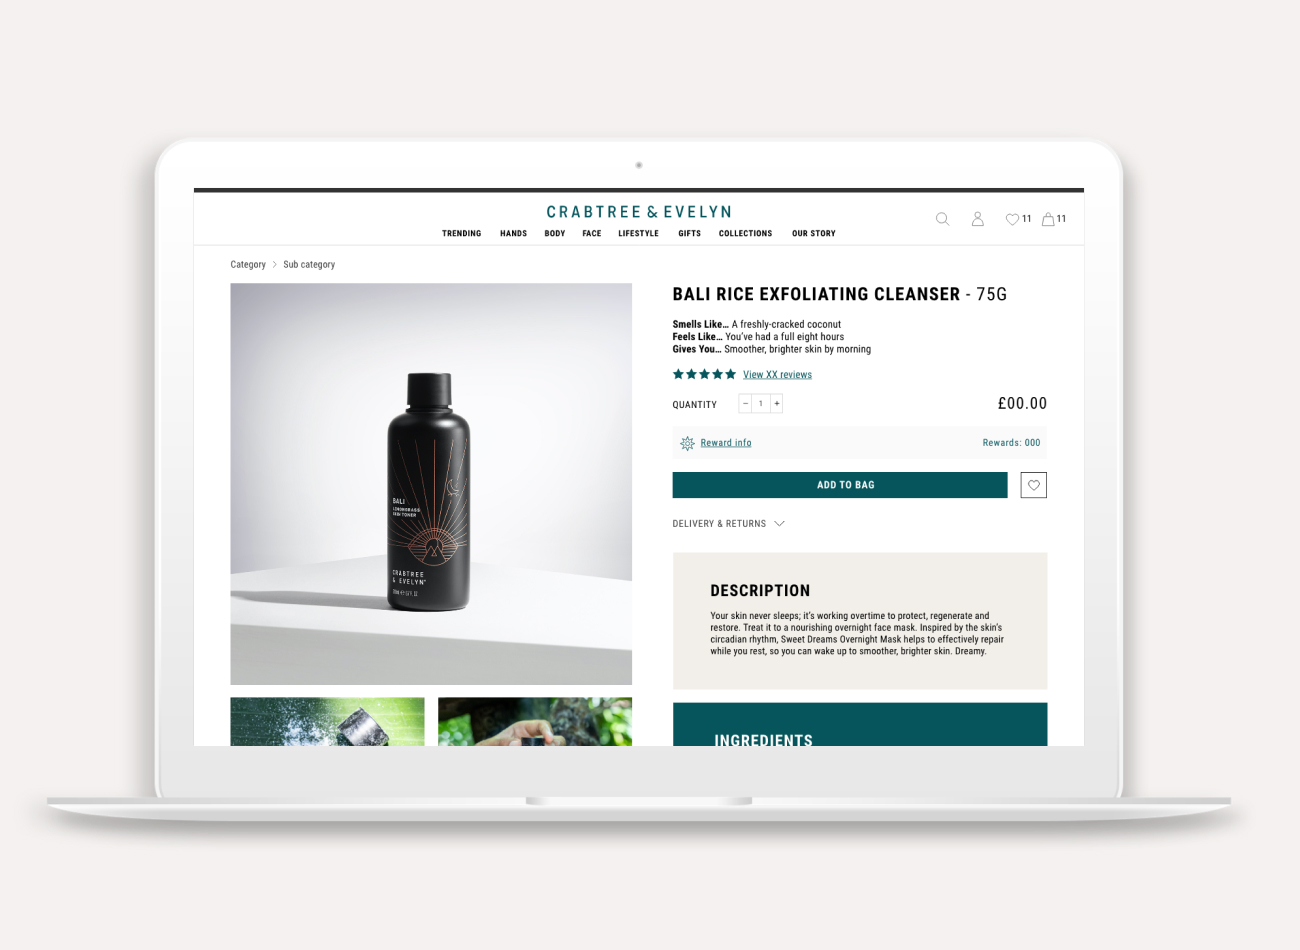 Crabtree & Evelyn - Site redesign